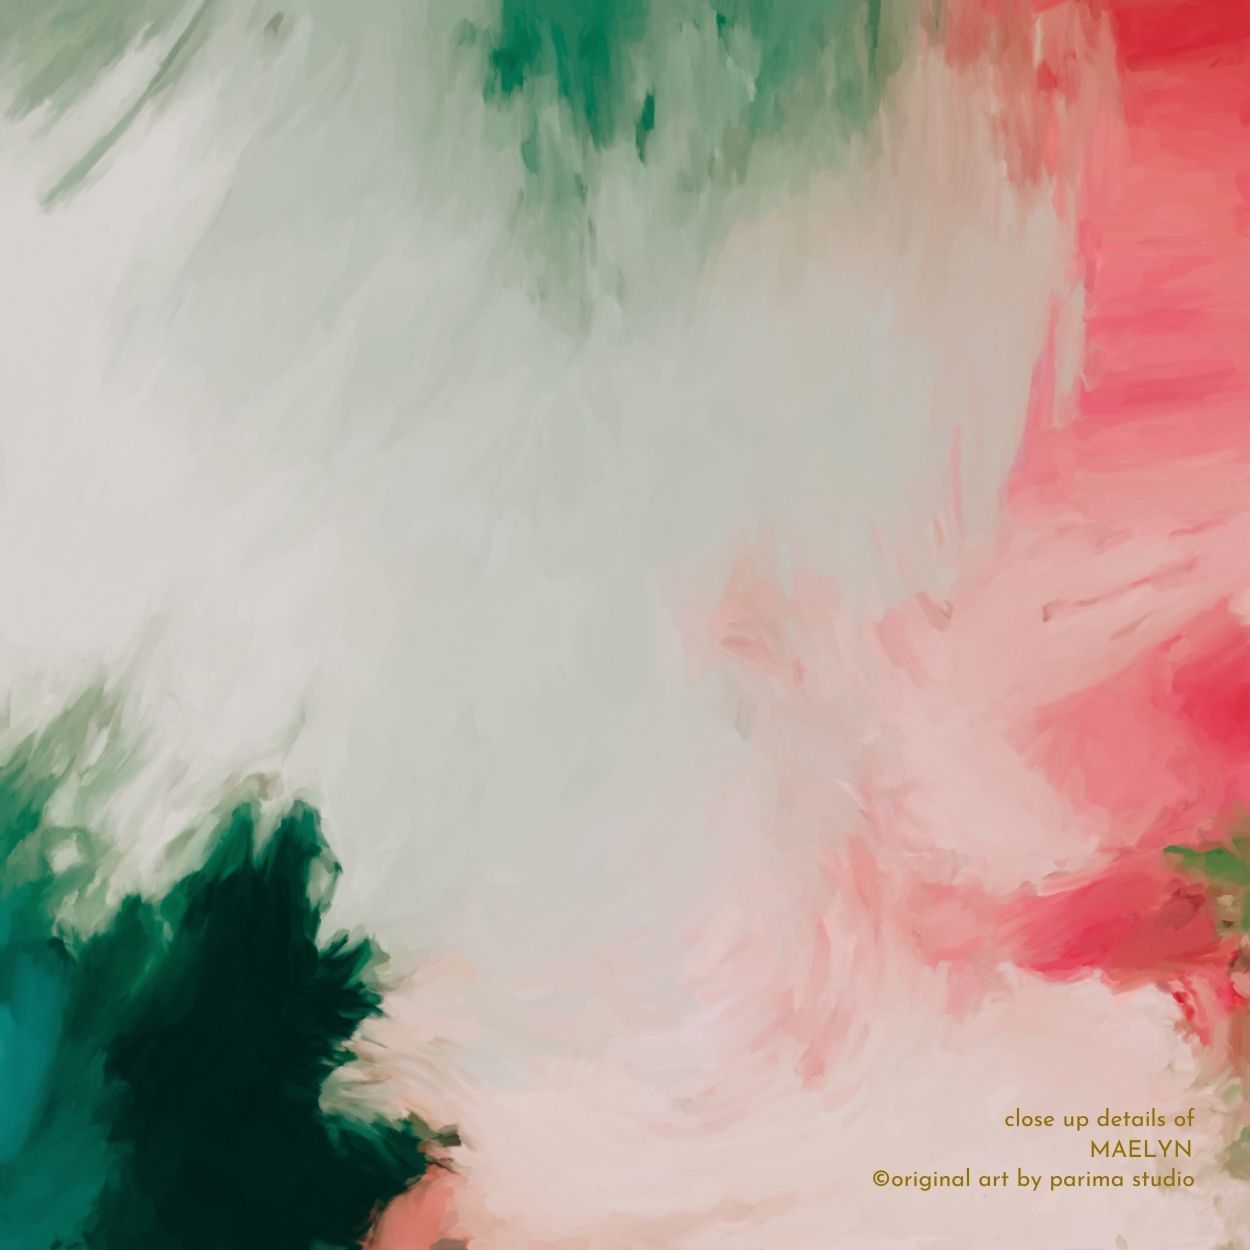 Close up details of Maelyn, pink and green colorful abstract wall art print by Parima Studio